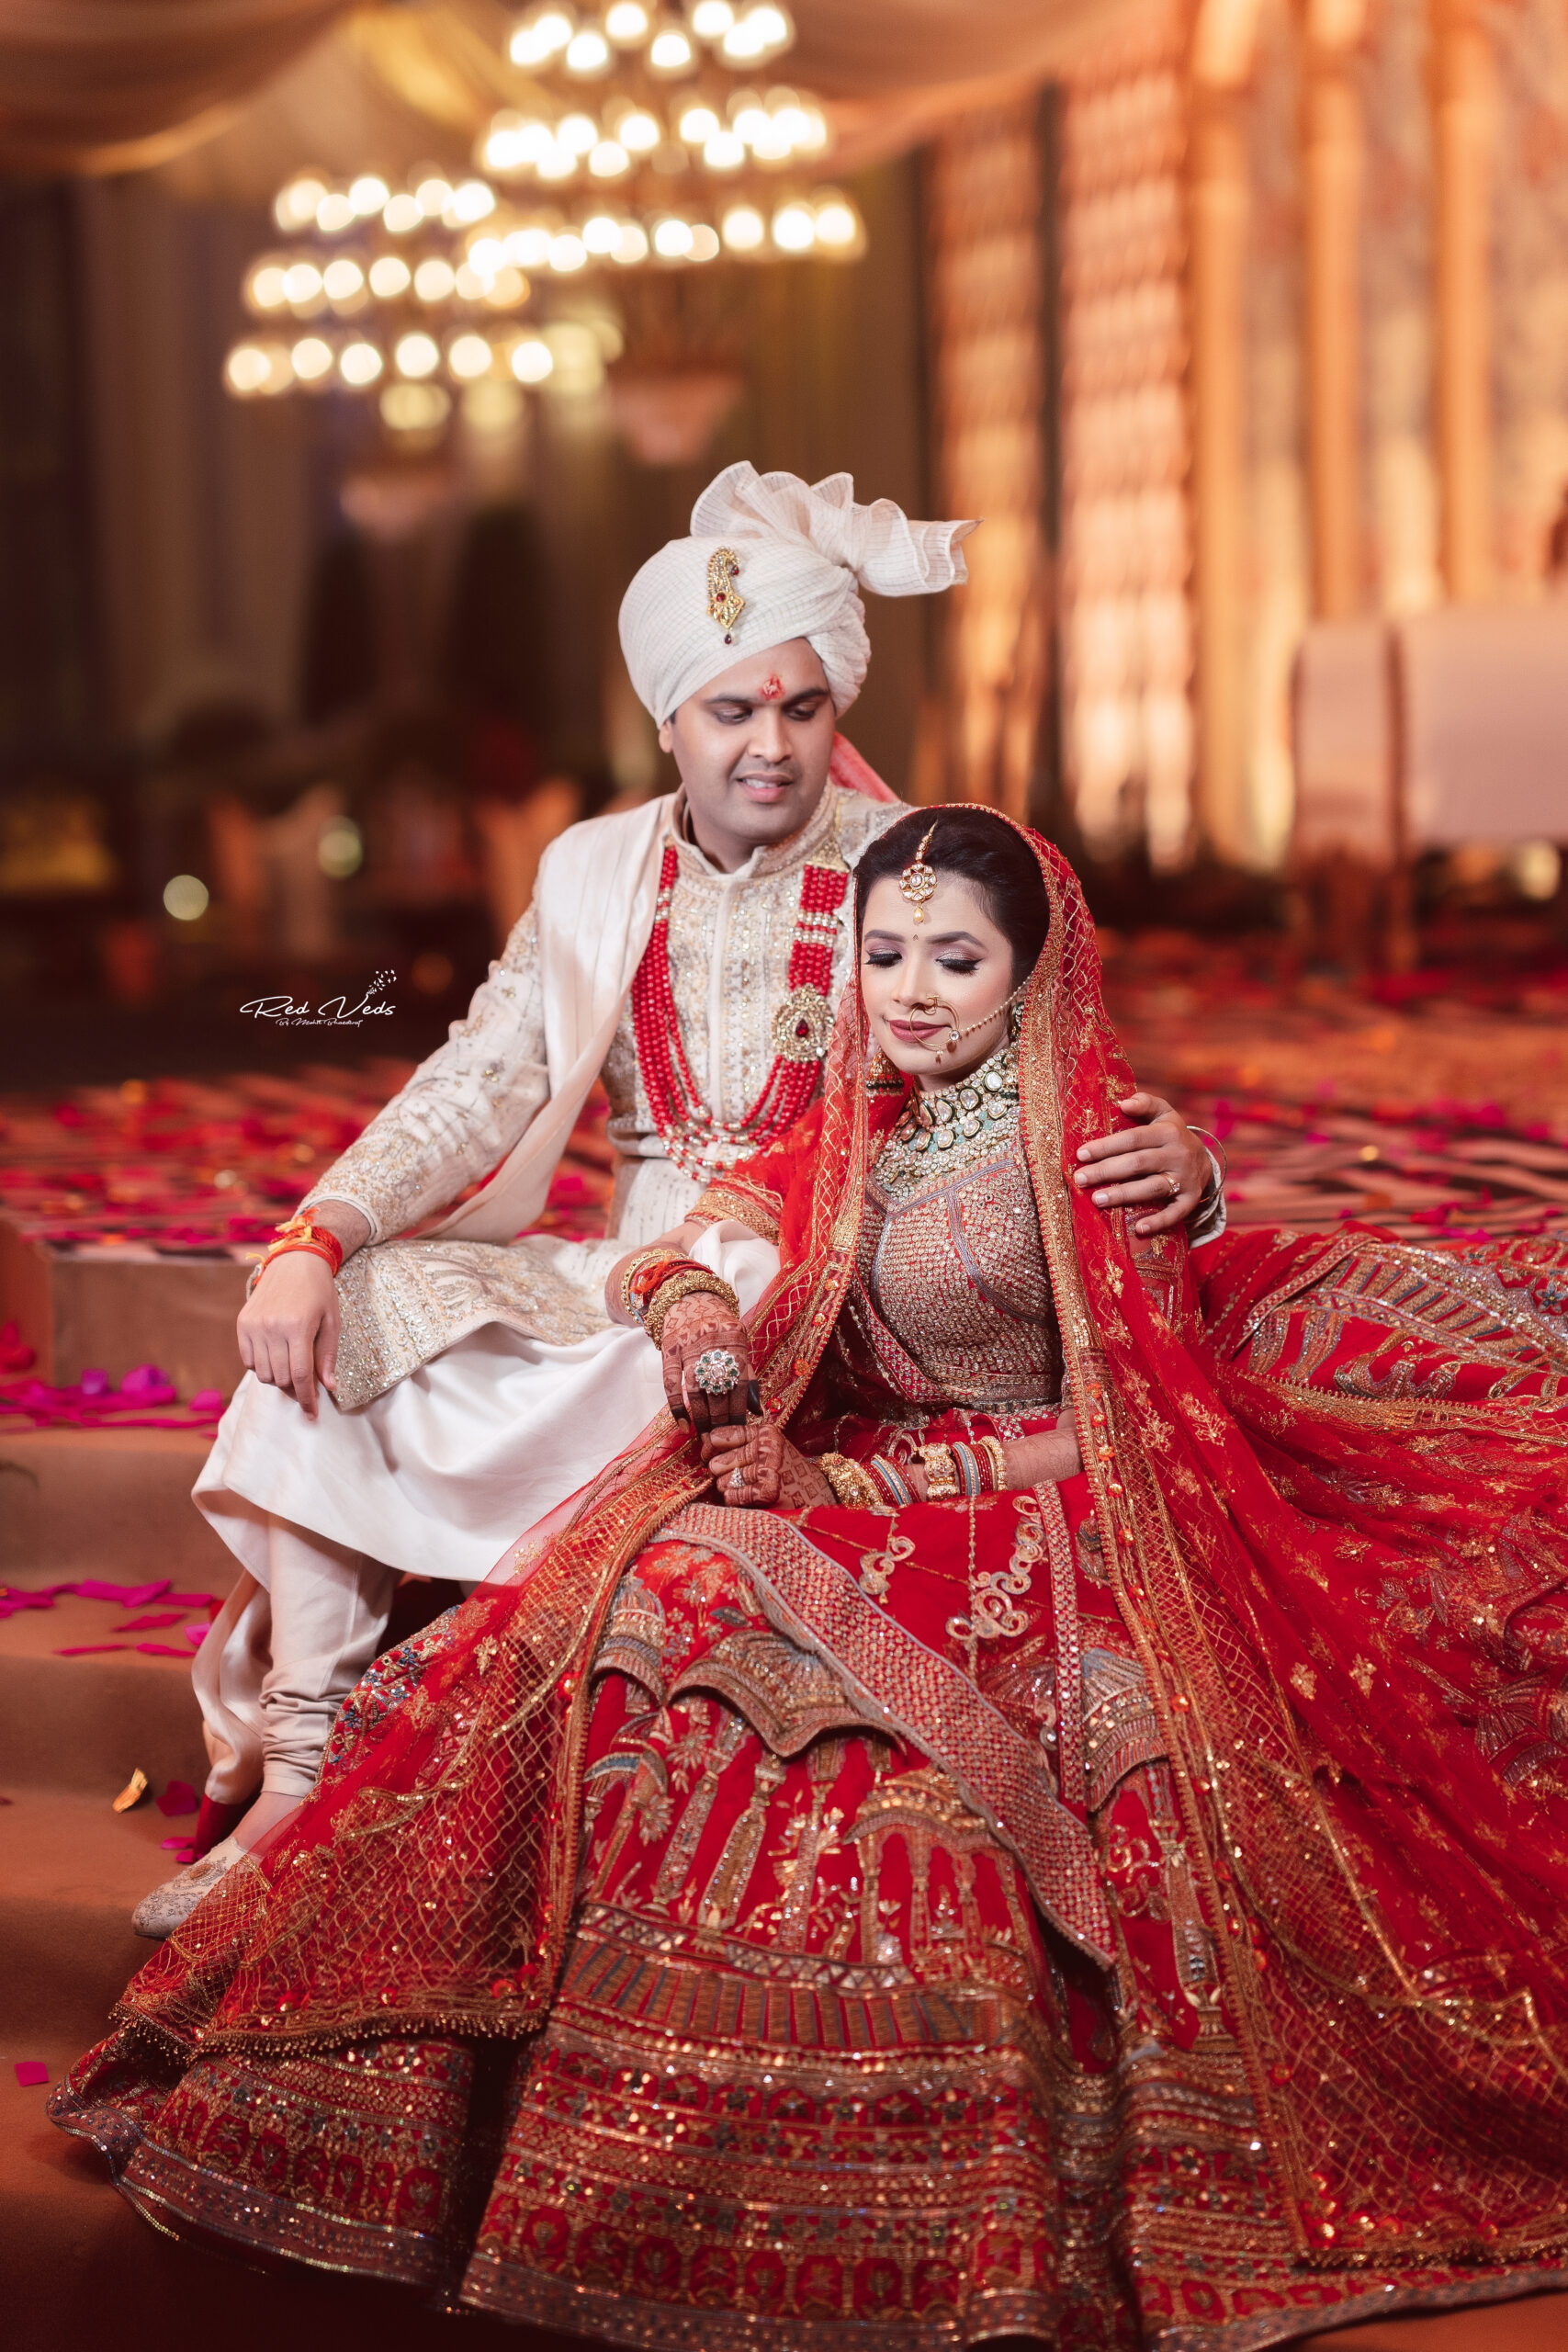 Photo From Manisha+Nithin - By Eesam & Co. | Indian wedding poses, Wedding  photoshoot poses, Indian wedding photography poses